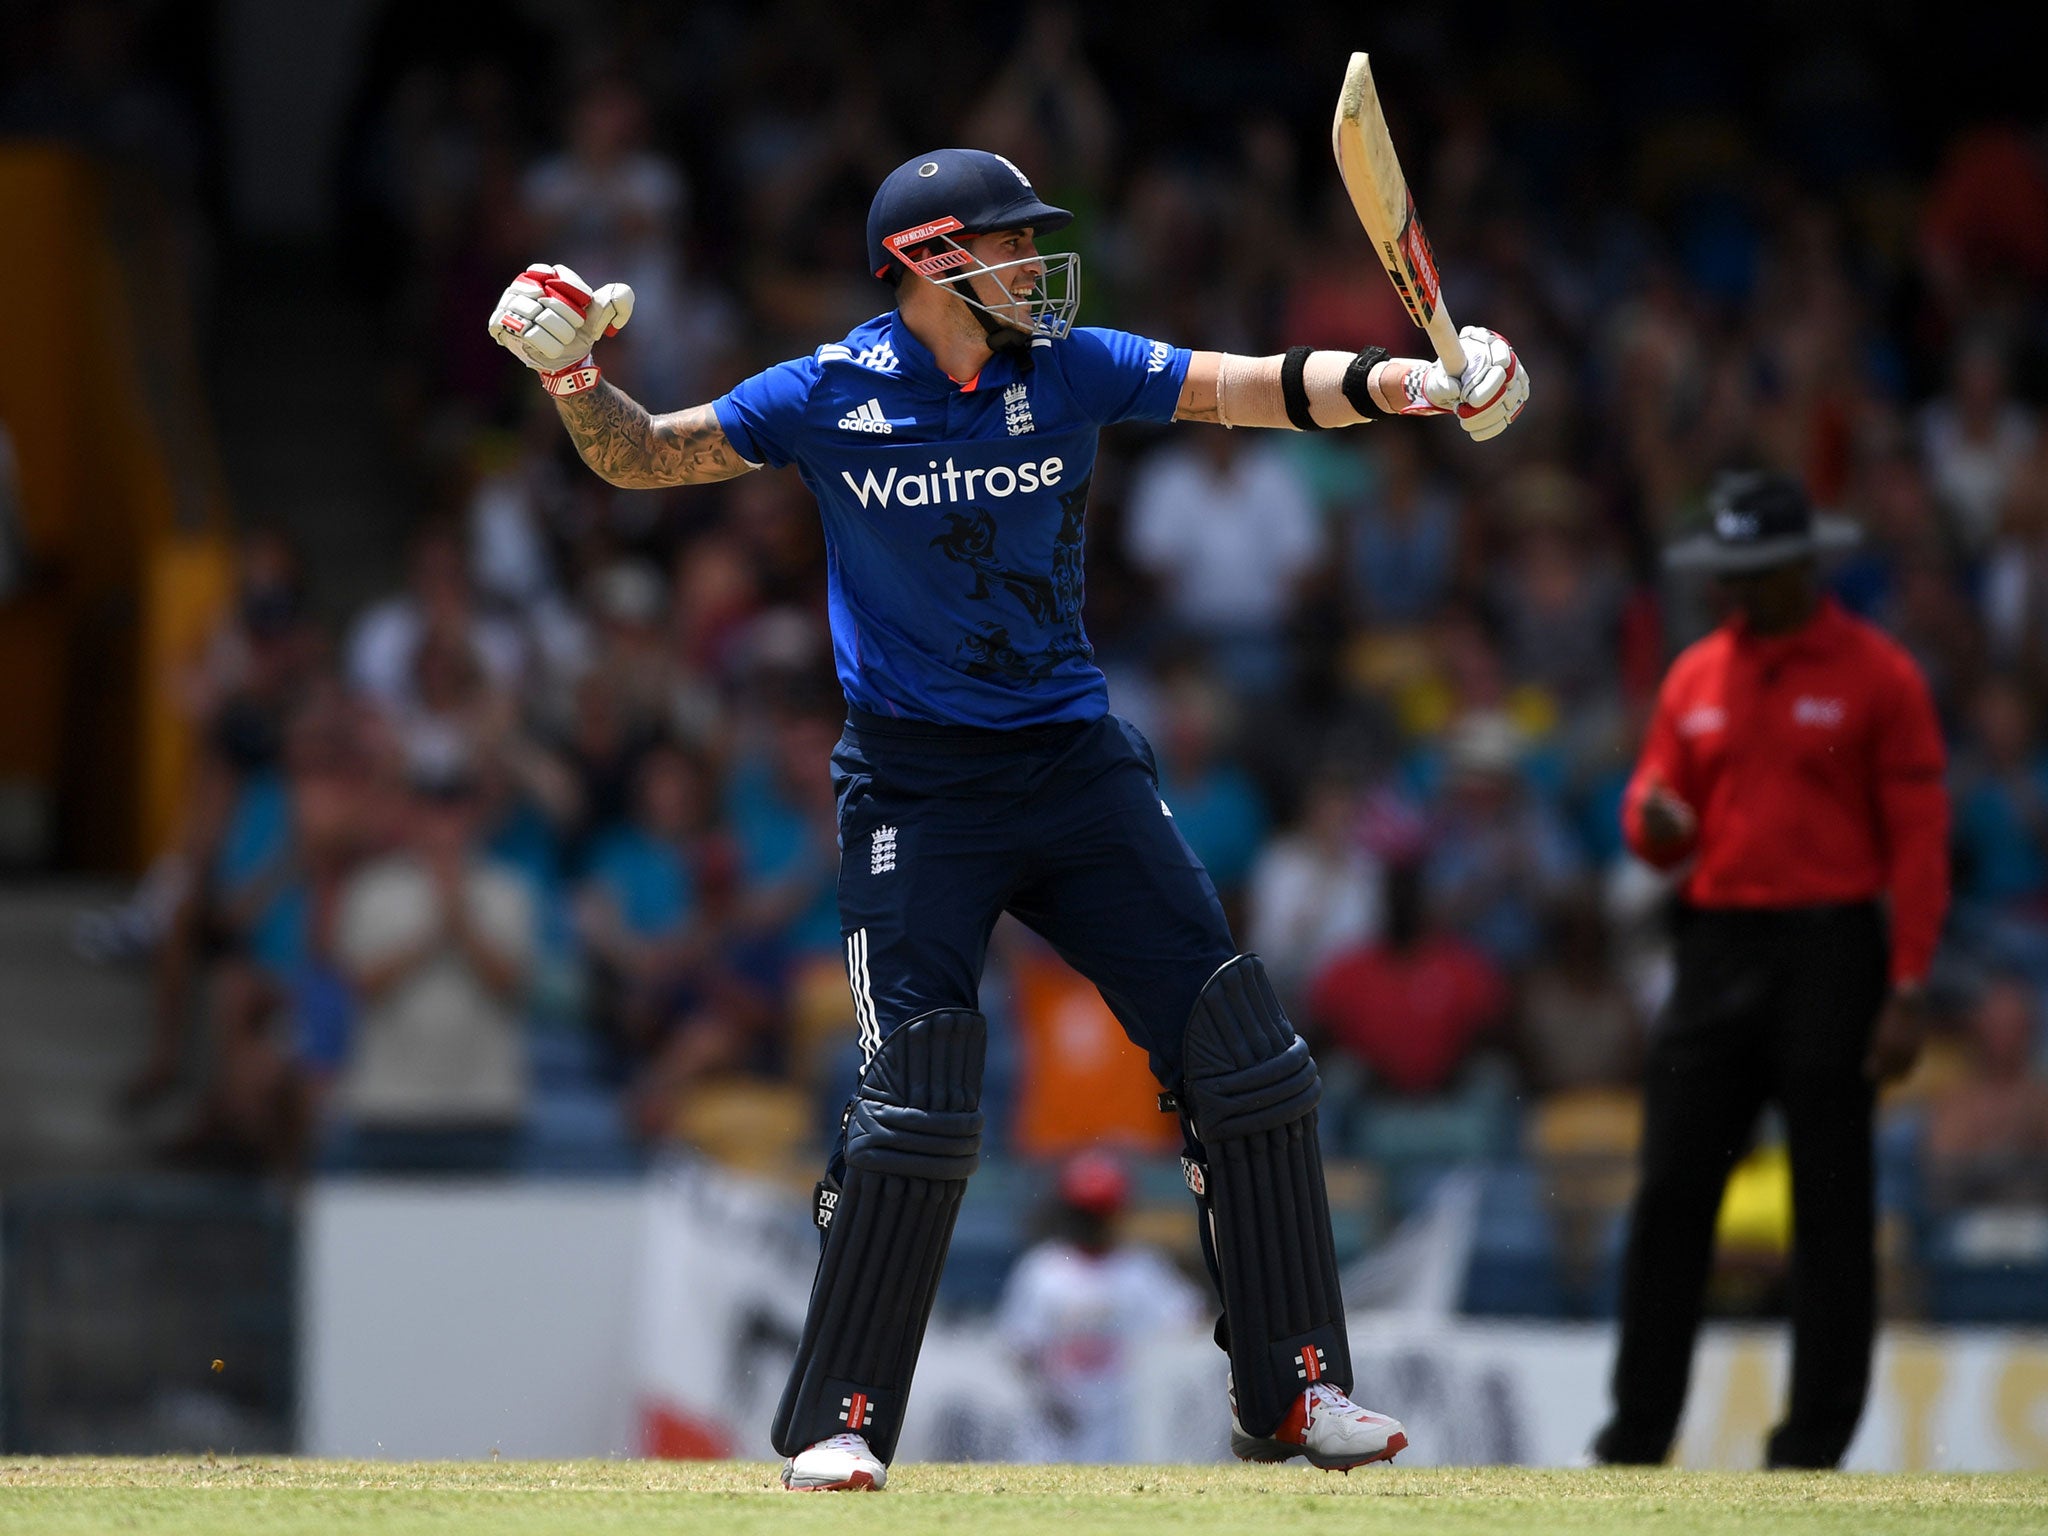 Alex Hales is targeting a move to England's Test middle order after impressing on his ODI return